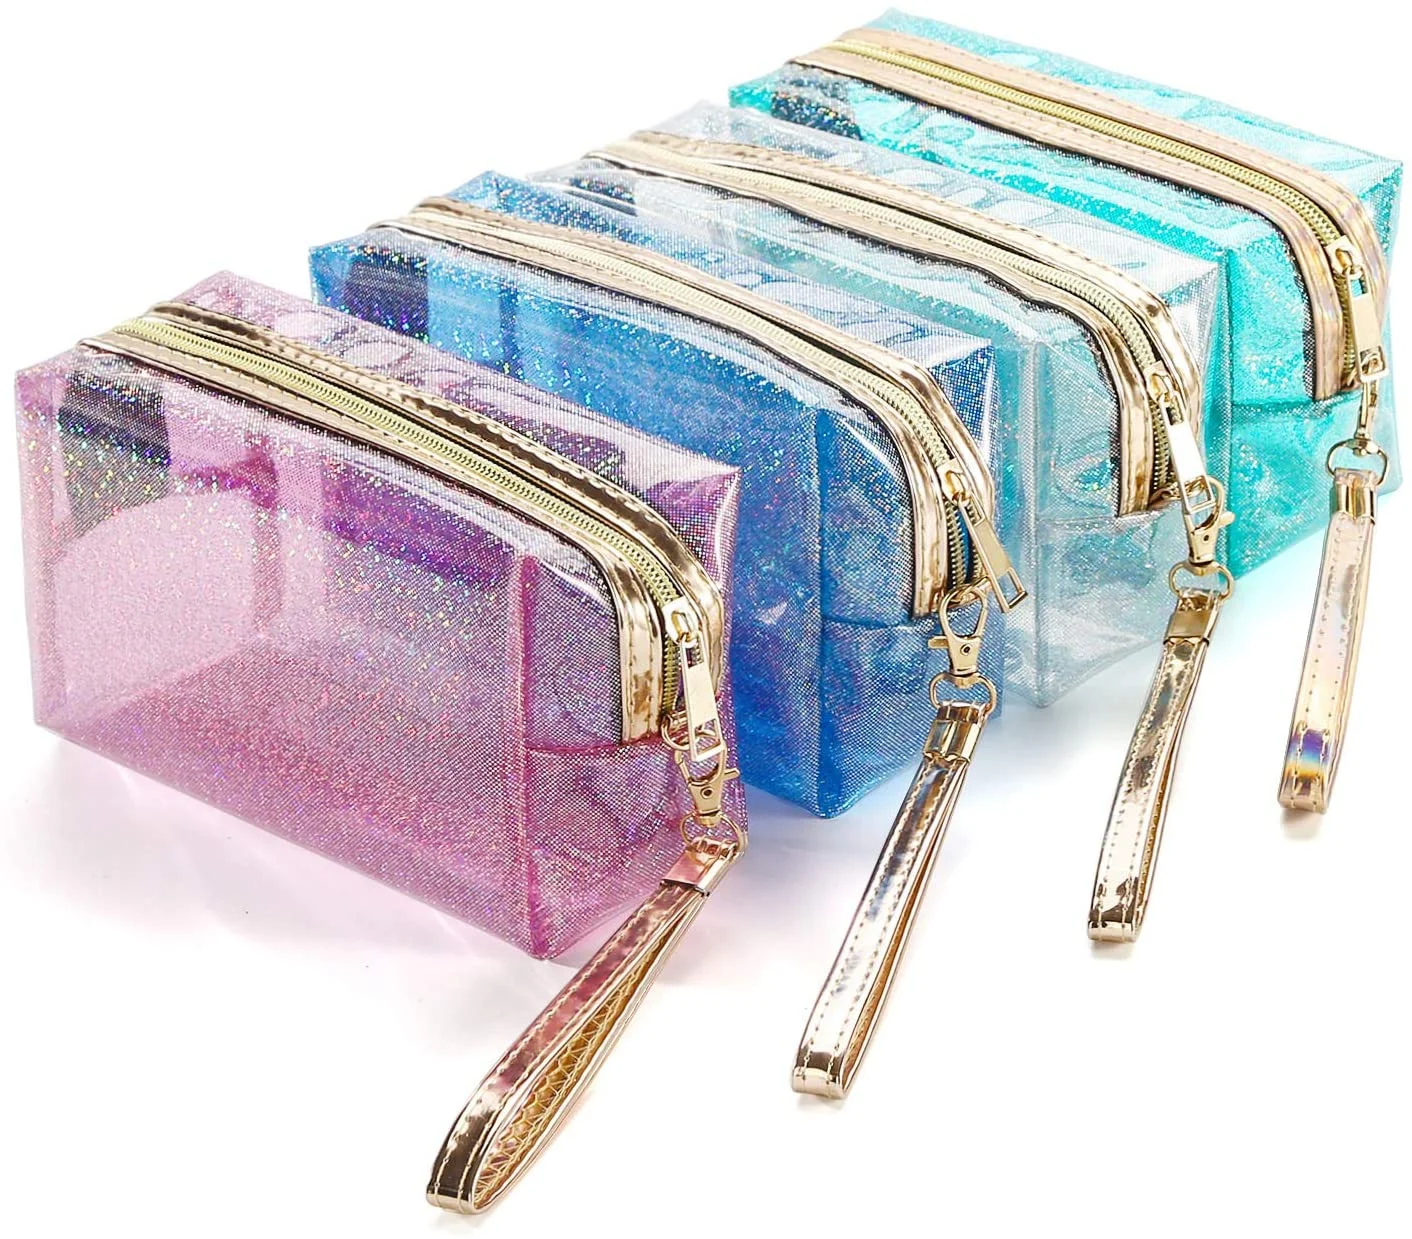 

Waterproof PVC TPU Transparent Zippered Toiletry Bag with Handle Strap Portable Clear Pouch Cosmetic Bags Makeup Bag, As your request